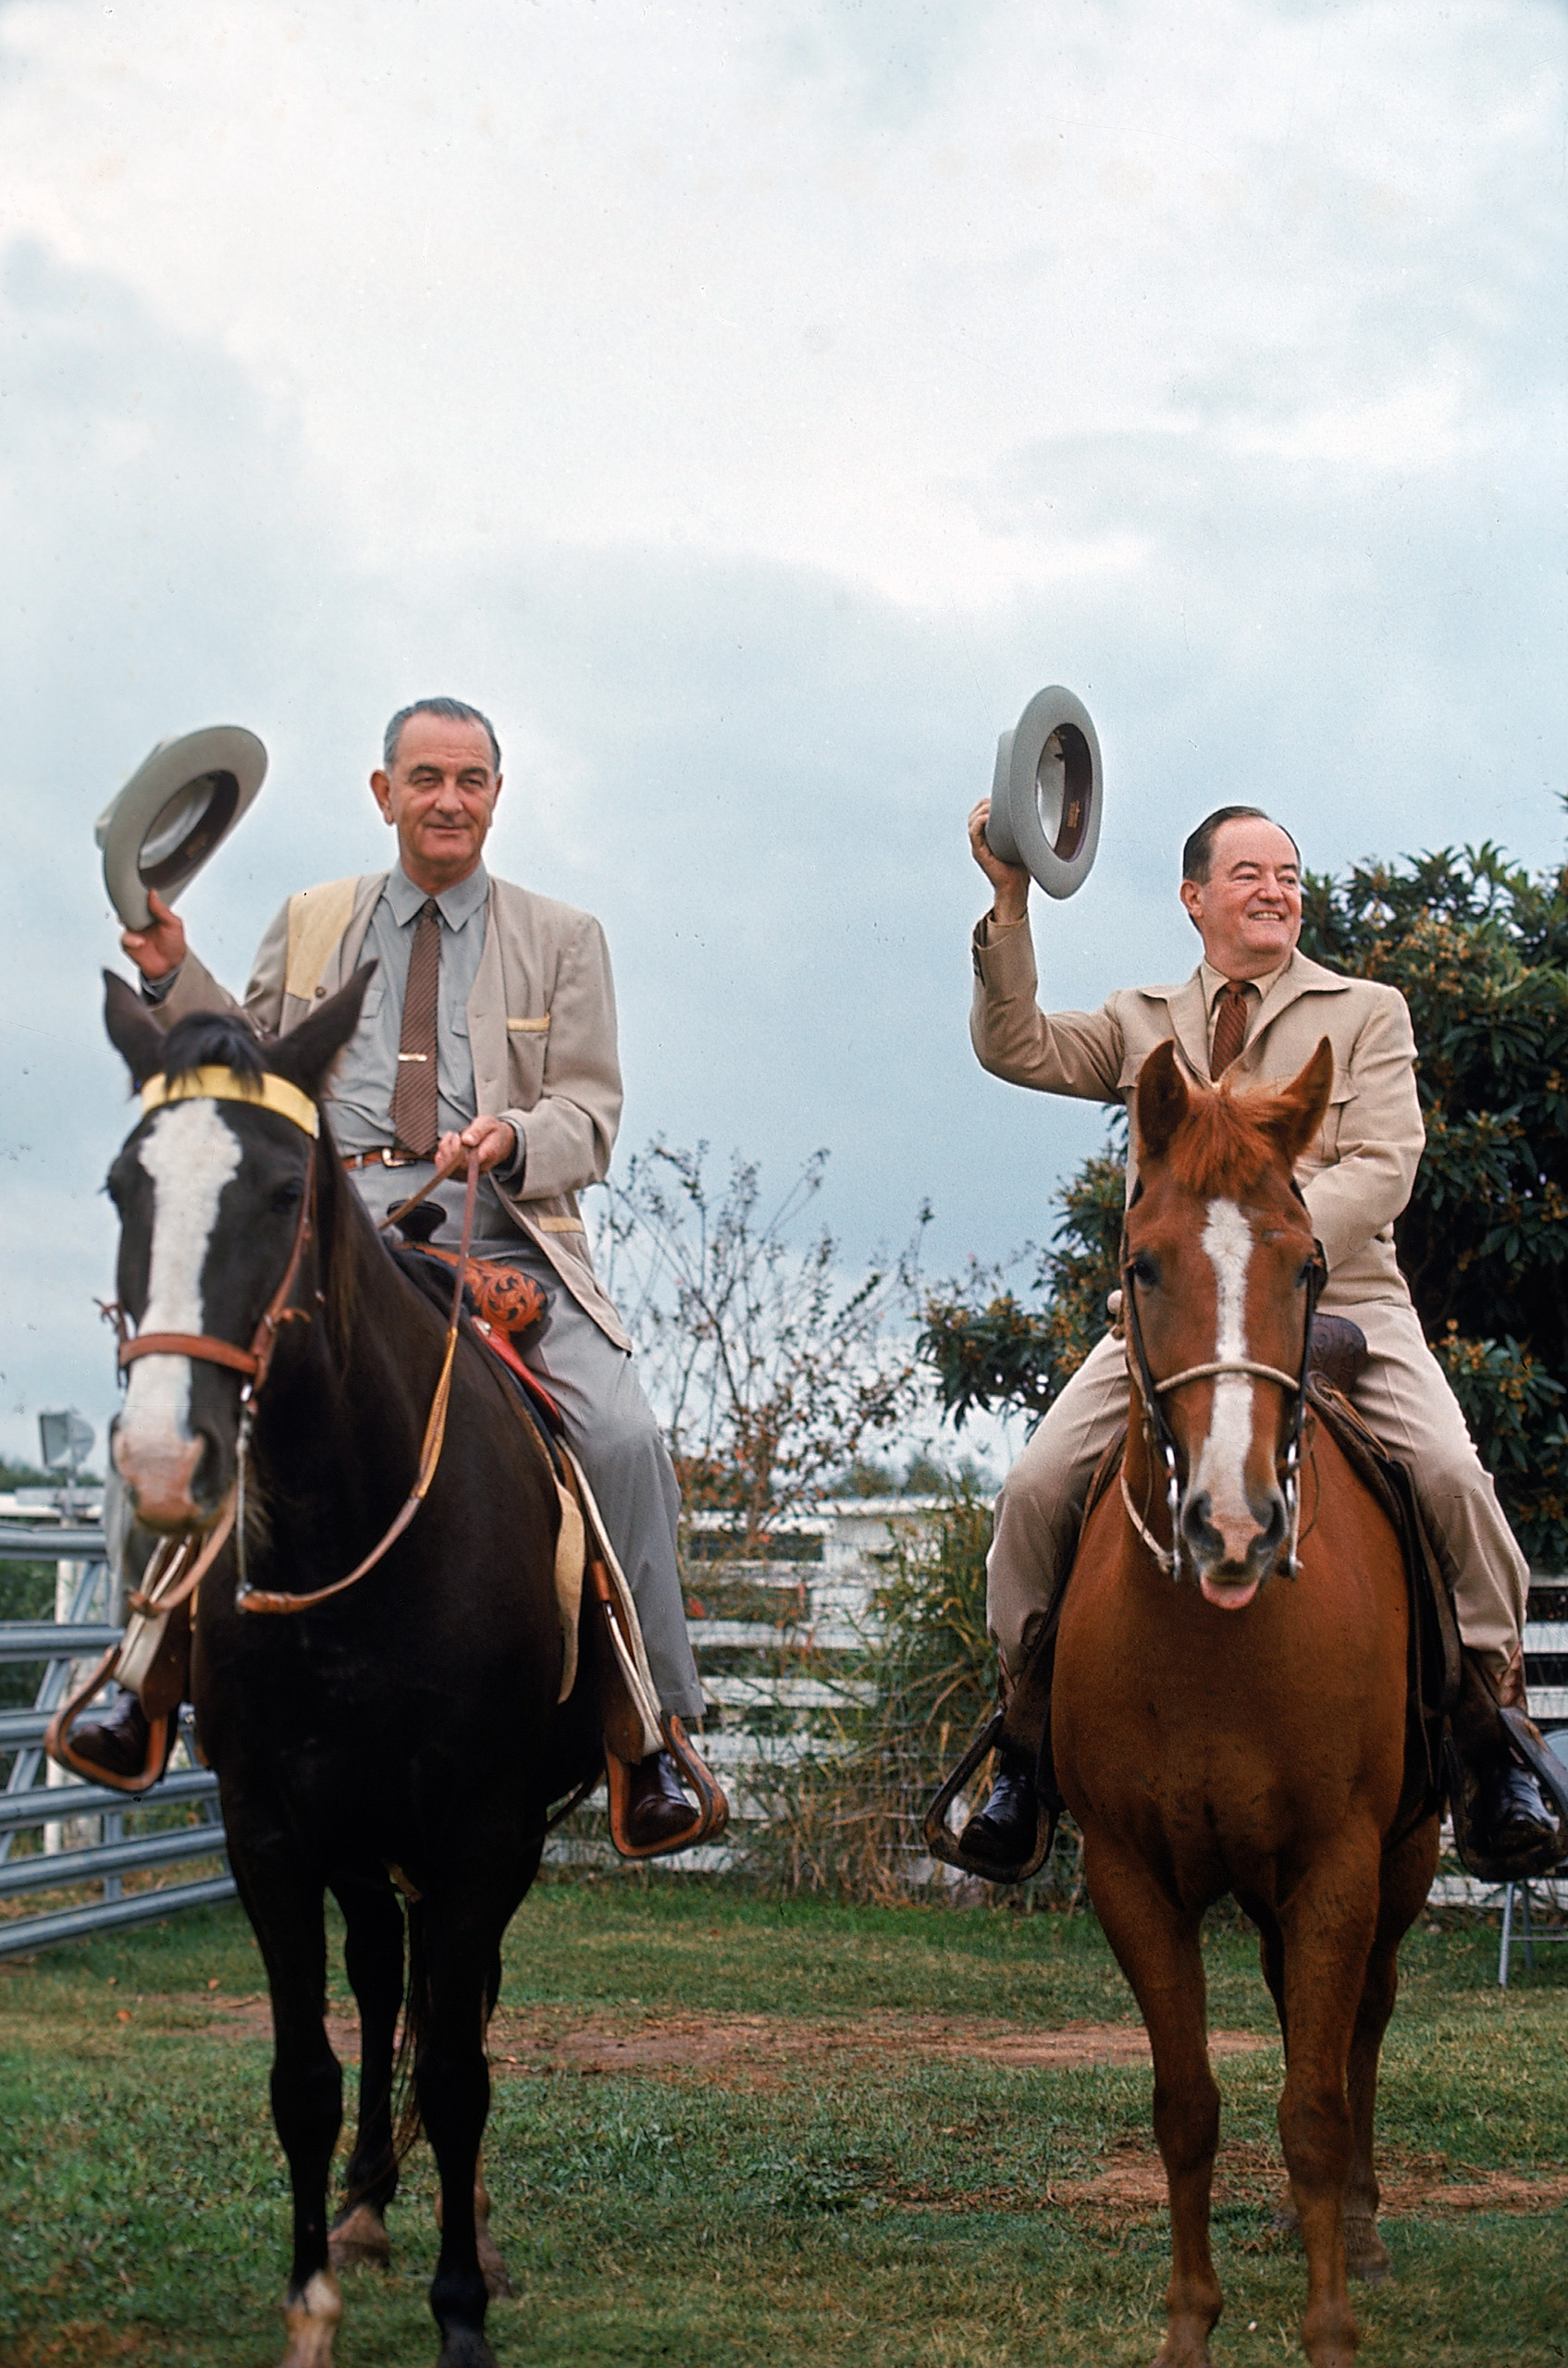 Taking the reins. At the LBJ ranch, the President and vice president-elect saddle up. Johnson outfitted Humphrey with cowboy clothes and then mounted him on a frisky quarter horse, El Rey, while he rode his Tennessee walker, Lady B. Then they went out to round up cattle. Humphrey was game but not expert.